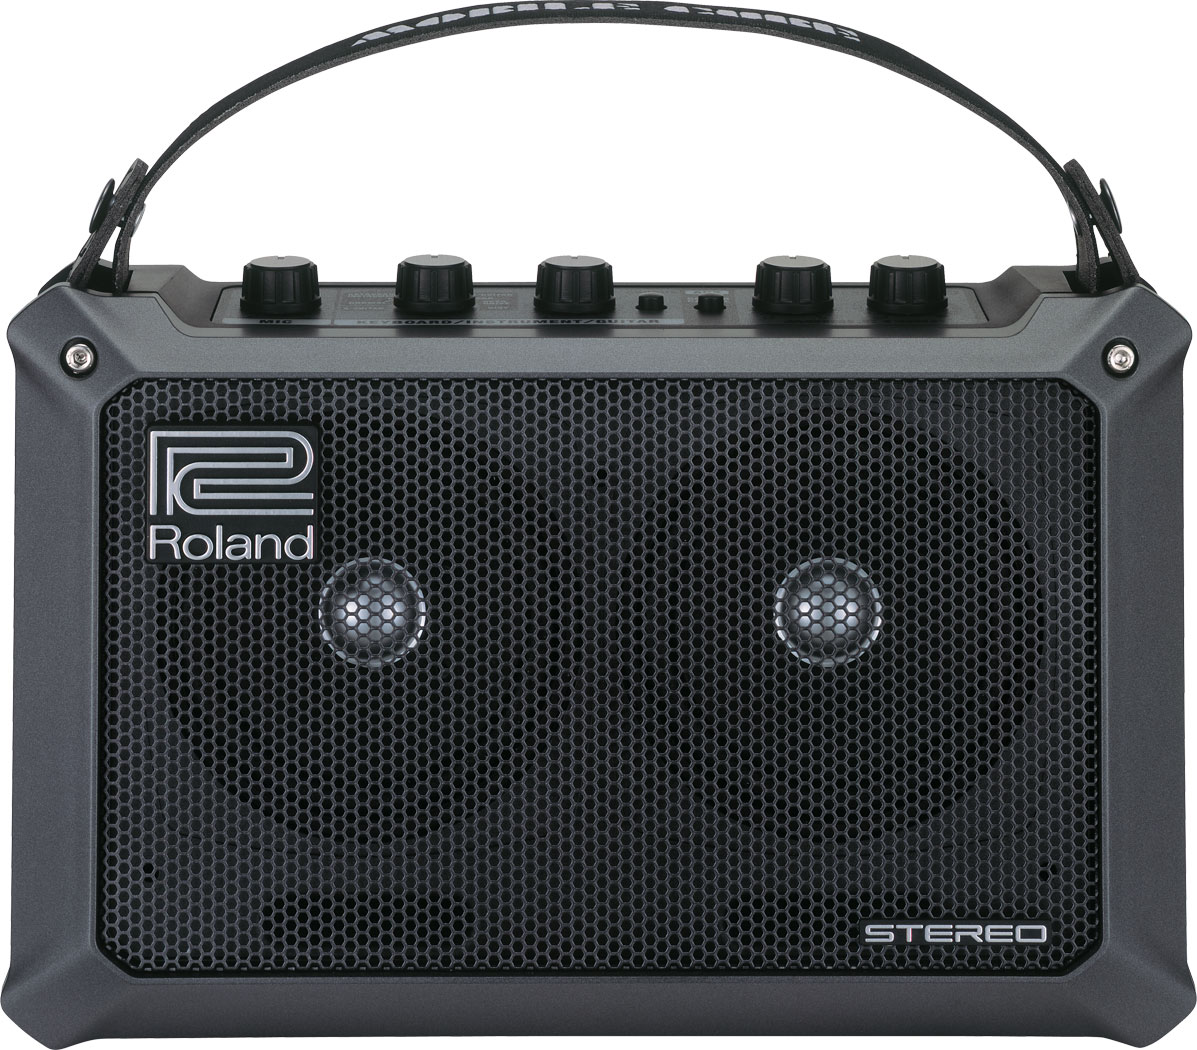 MOBILE CUBE | Battery-Powered Stereo Amplifier - Roland